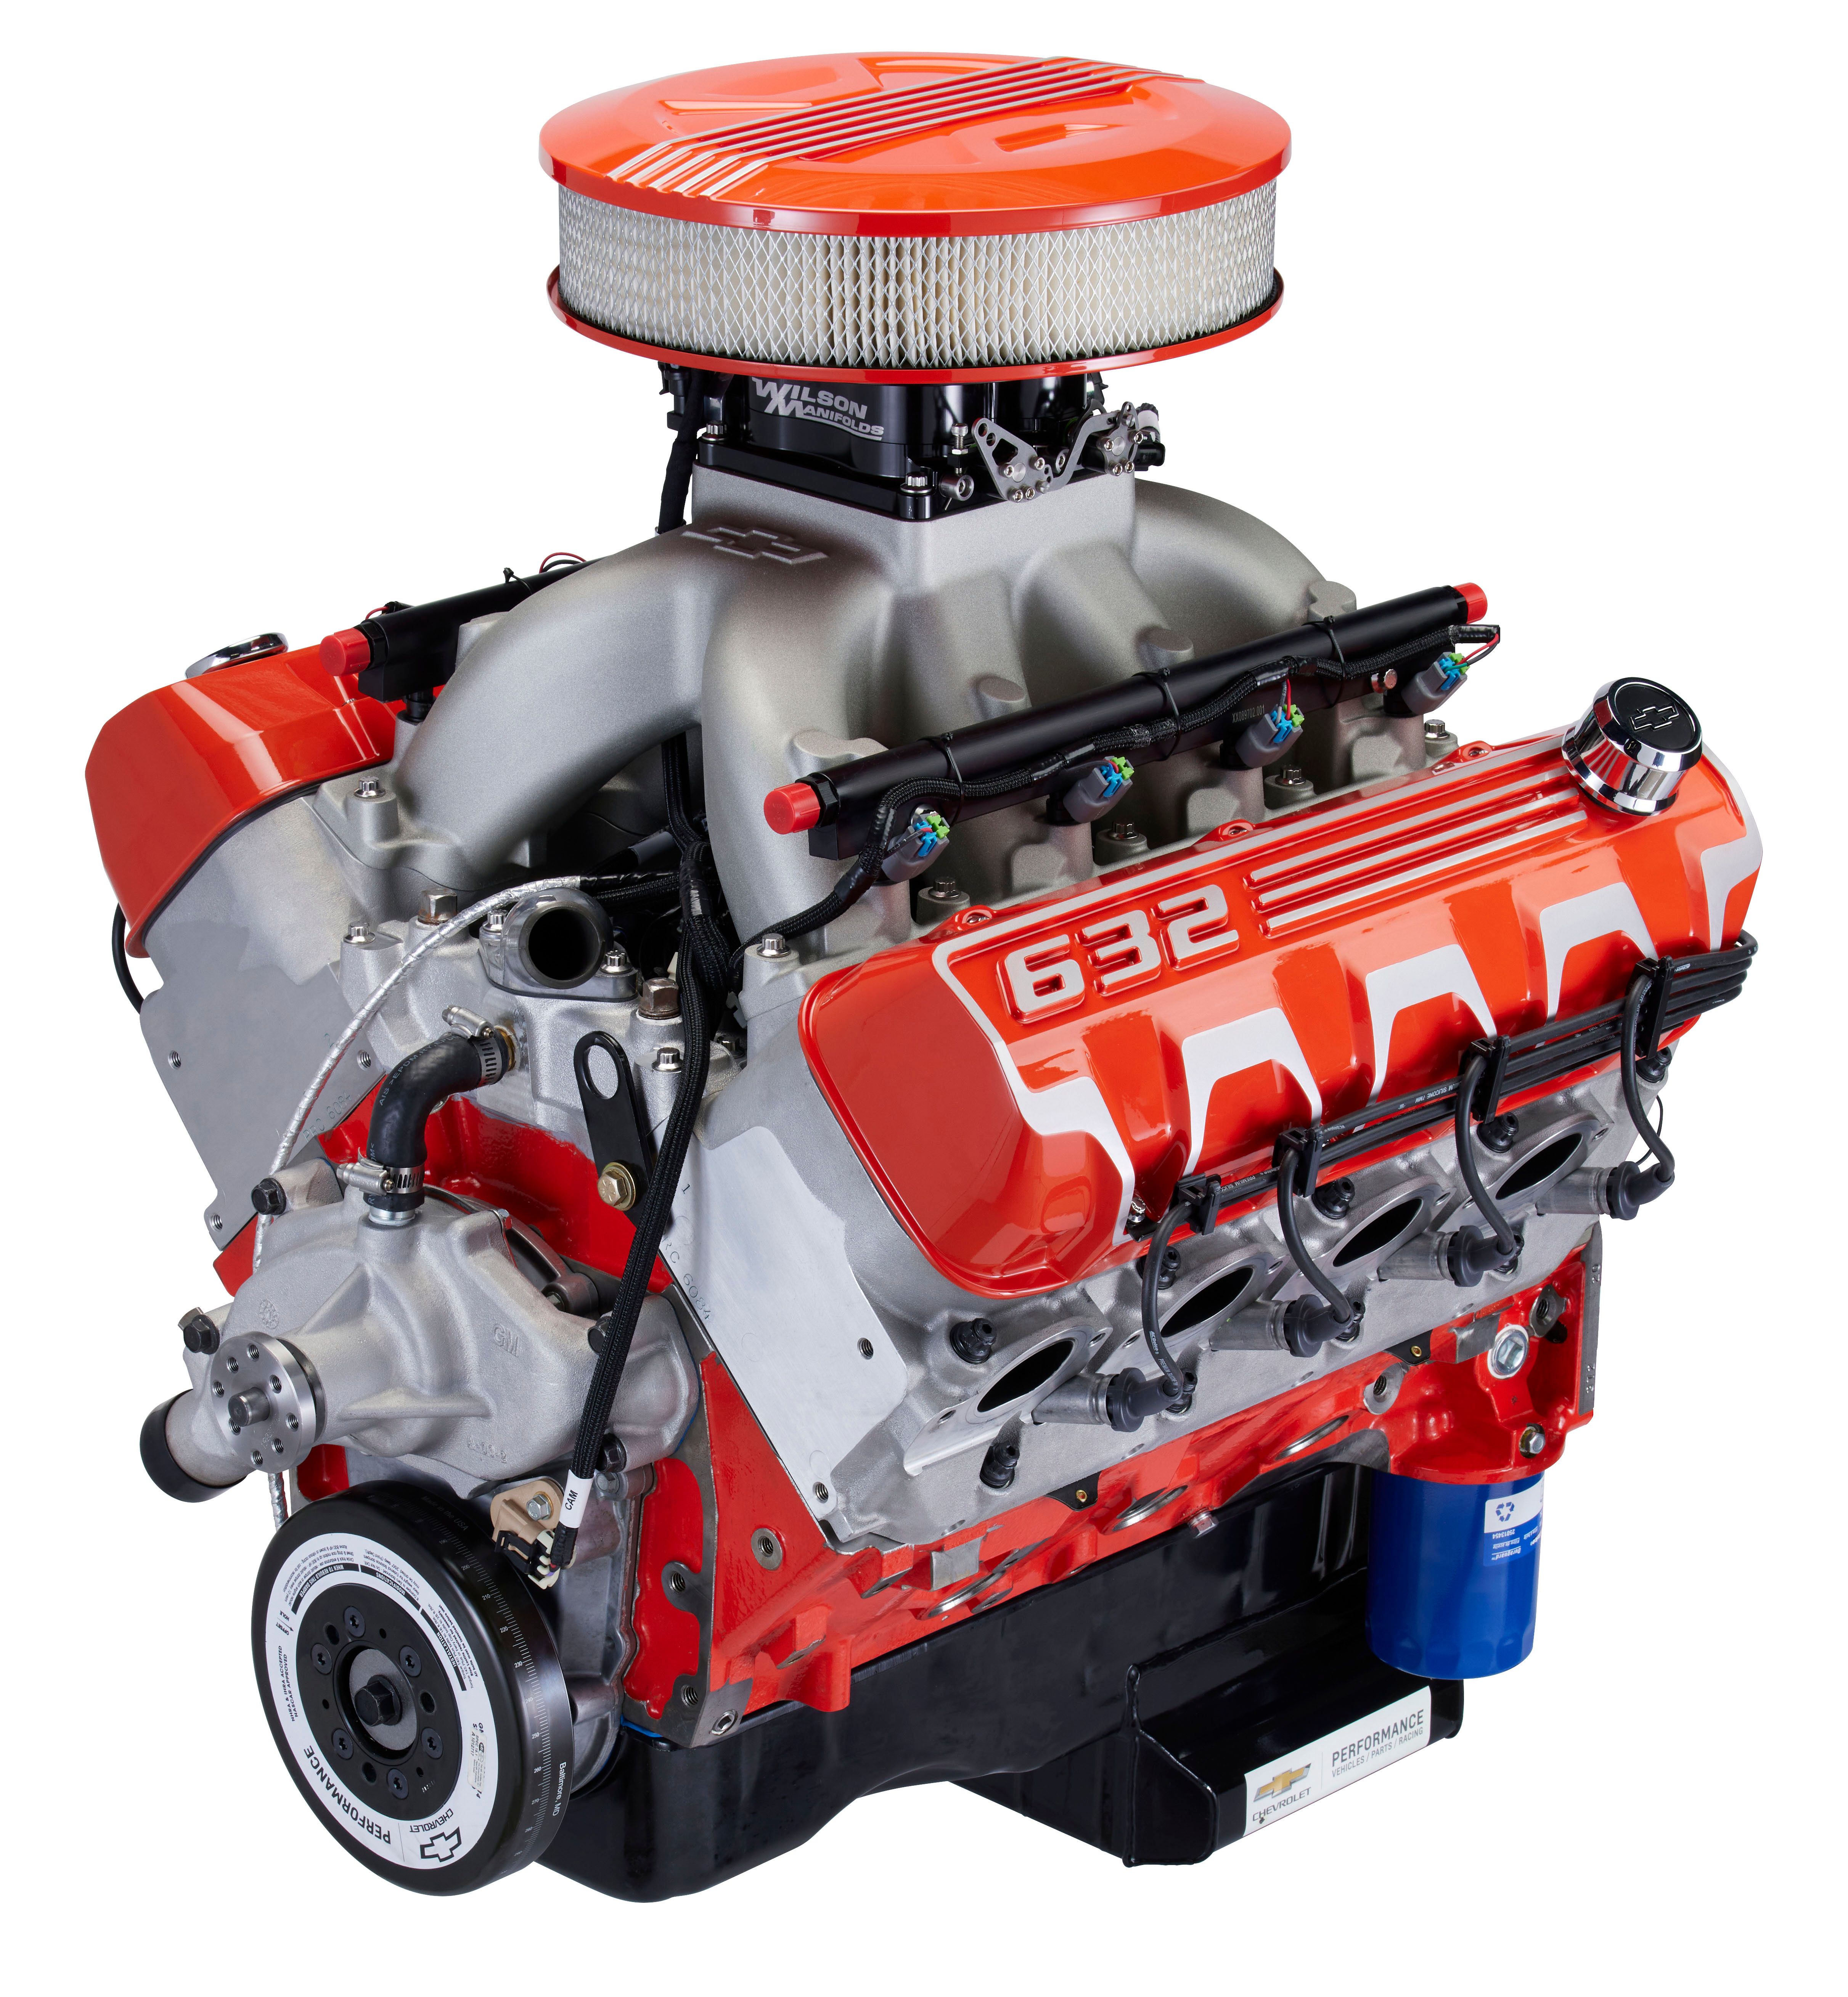 The ZZ632 Crate Engine.